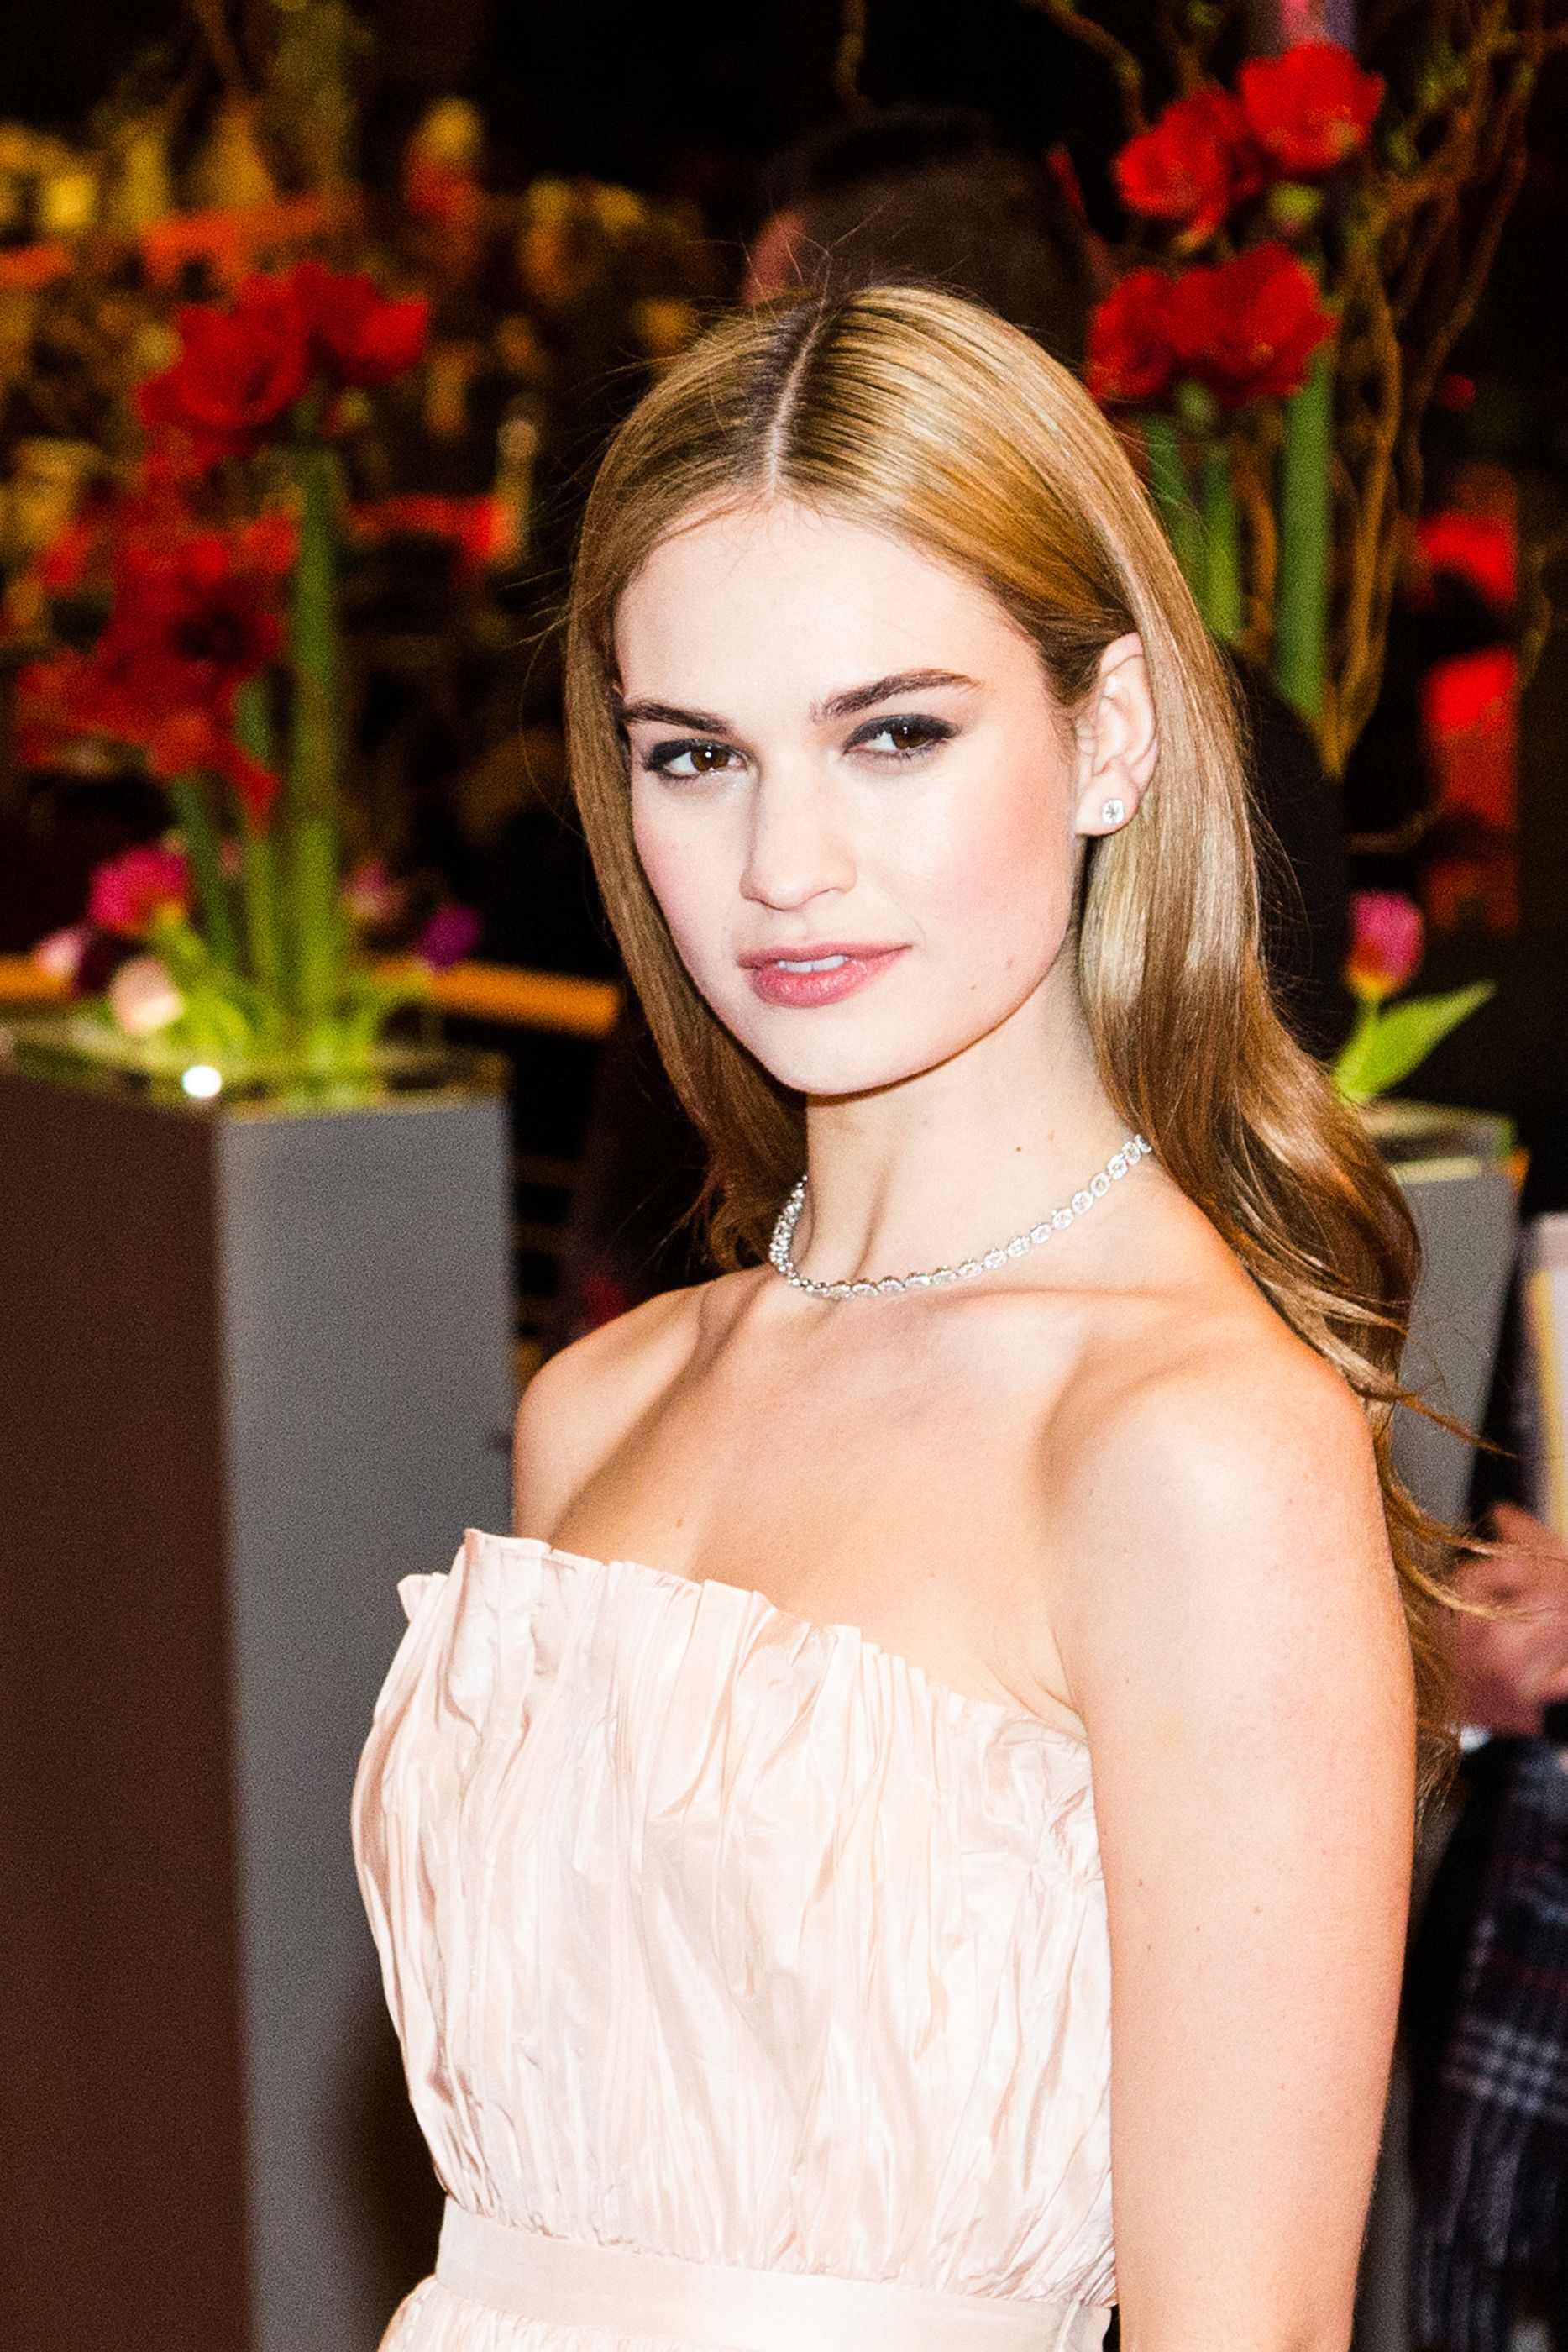 Lily James attends the Cinderella premiere during the 65th Berlinale International Film Festival at Berlinale Palace on February 13, 2015 in Berlin, Germany.